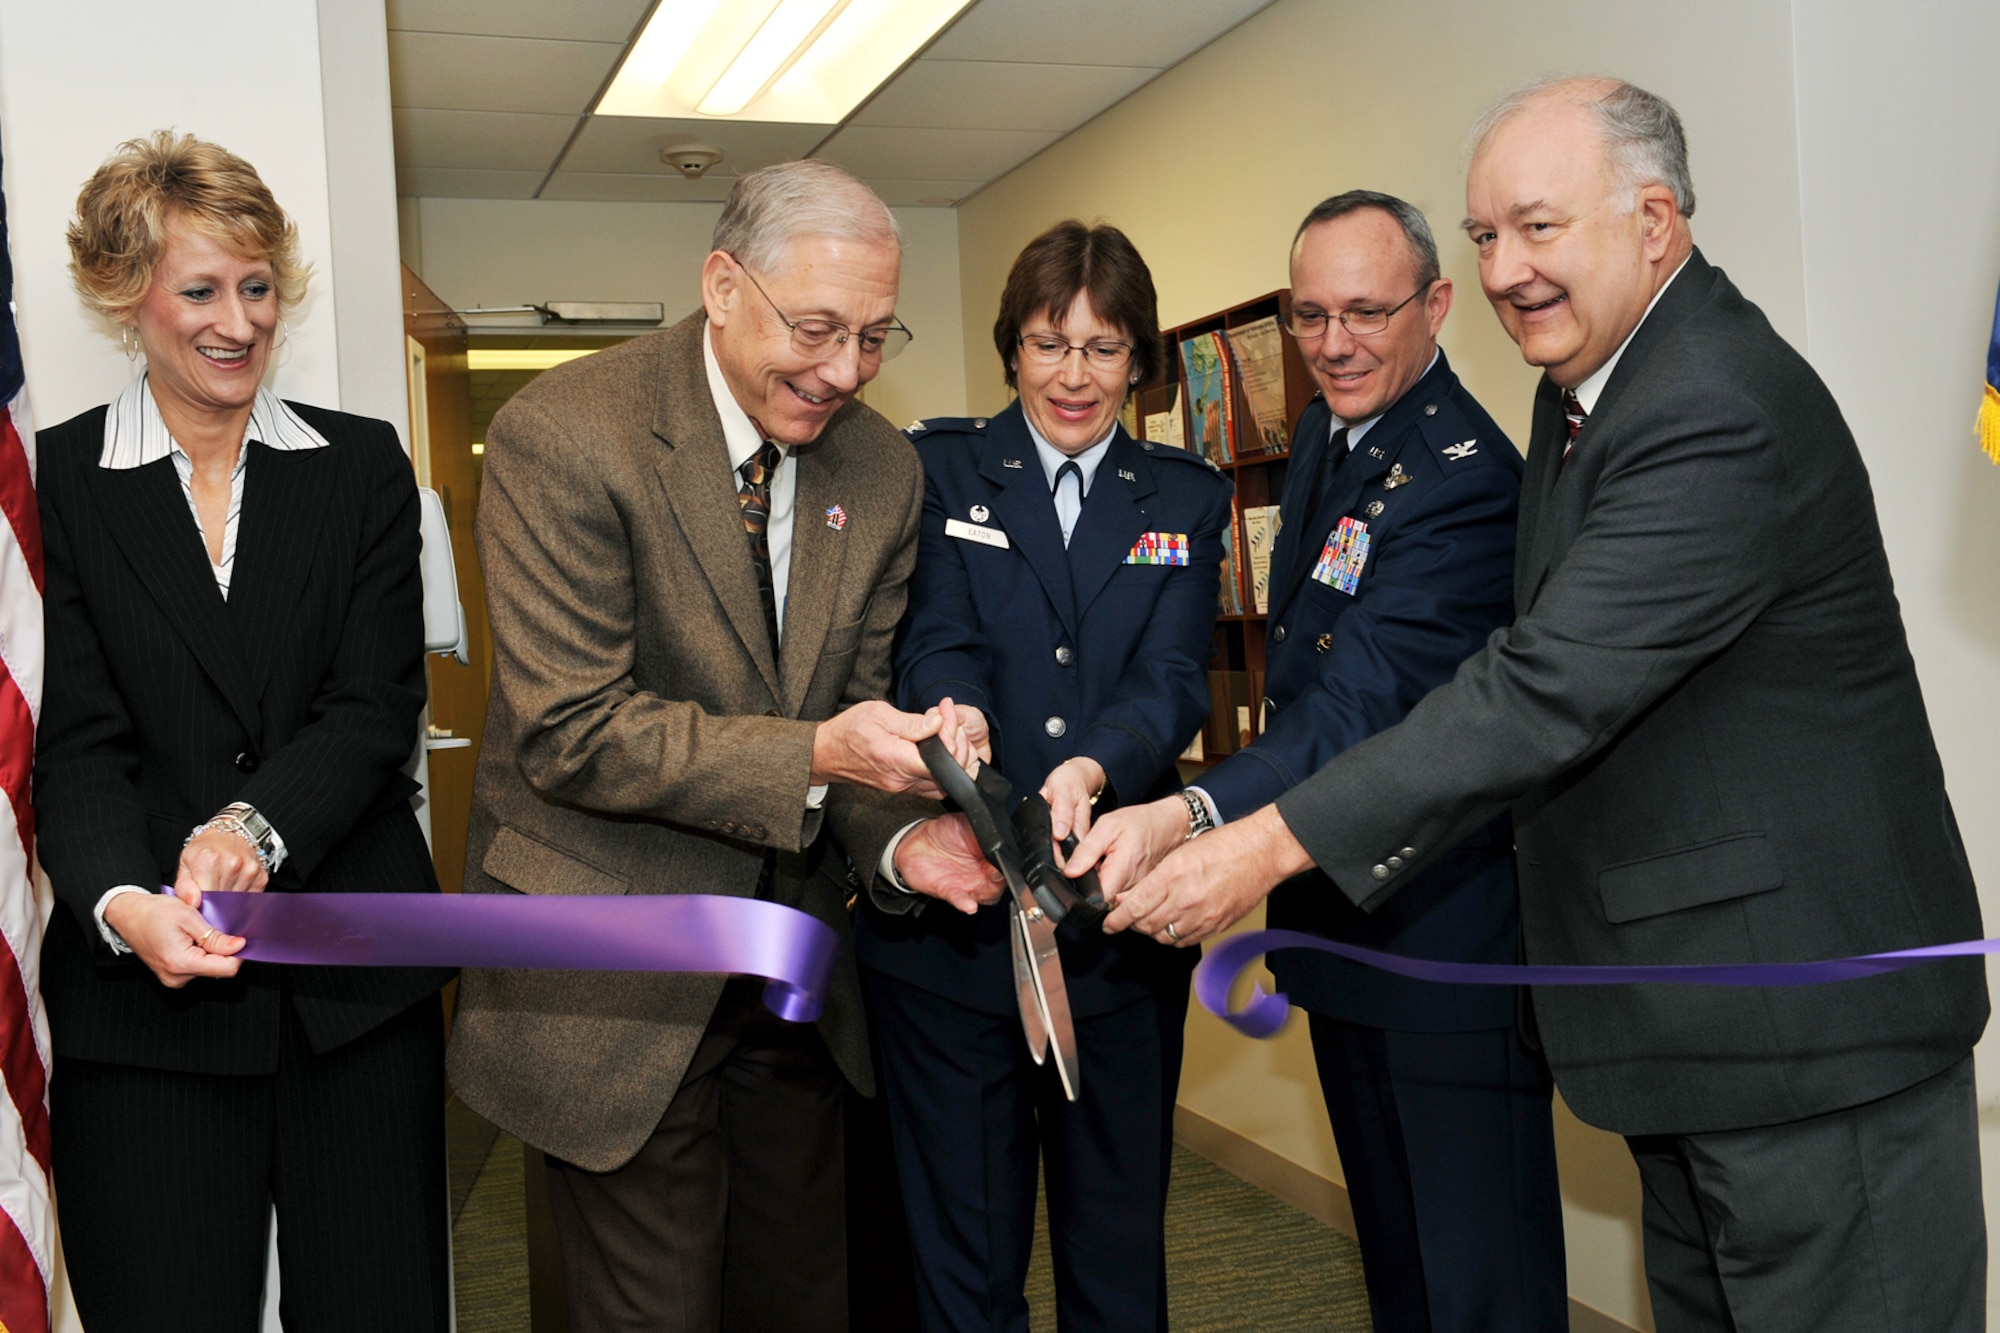 OFFUTT AIR FORCE BASE Neb. - (From left to right,) Cindy Sestak, assistant director of the Nebraska-Western Iowa health care system; Al Wasko, director of the Nebraska-Western Iowa health care system; Col. Linda Eaton, 55th Medical Group commander; Col. Robert Maness, 55th Wing vice commander; and Ed Babbitt, mayor of Bellevue, cut the ribbon during the grand opening ceremony of the new Veterans Affairs Community-based outpatient clinic, located inside the Ehrling Bergquist Clinic here April 25. With the opening of the VA outpatient clinic, veterans living in the Bellevue area no longer have to travel to Omaha or other cities to receive VA medical care. U.S. Air Force photo by Charles Haymond
 